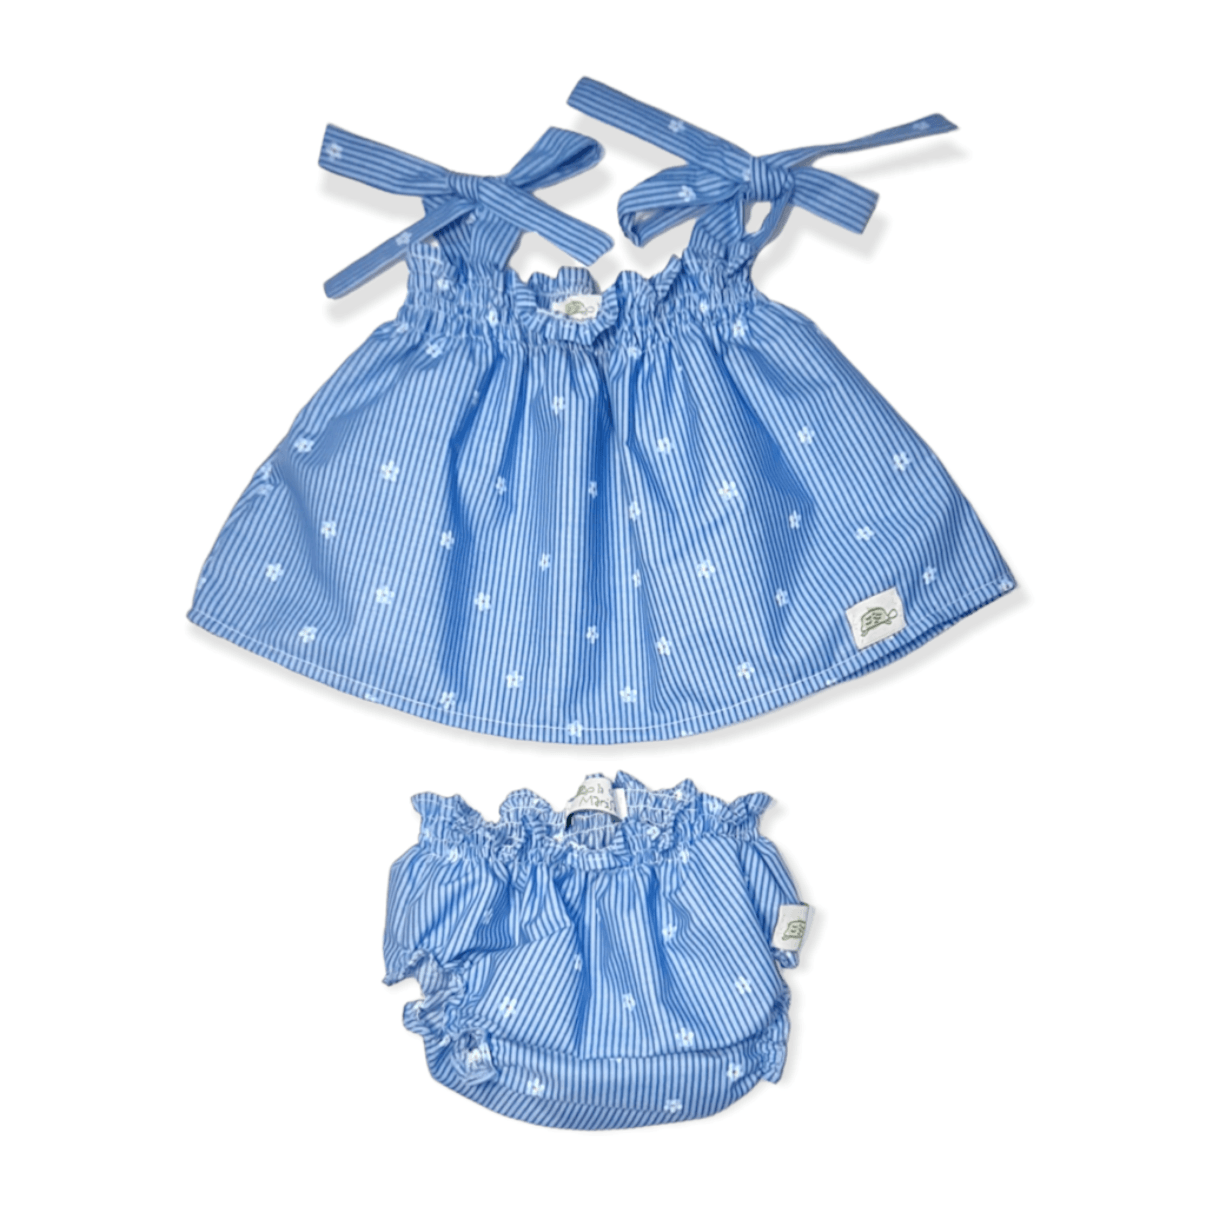 blue dress and bloomer for kids